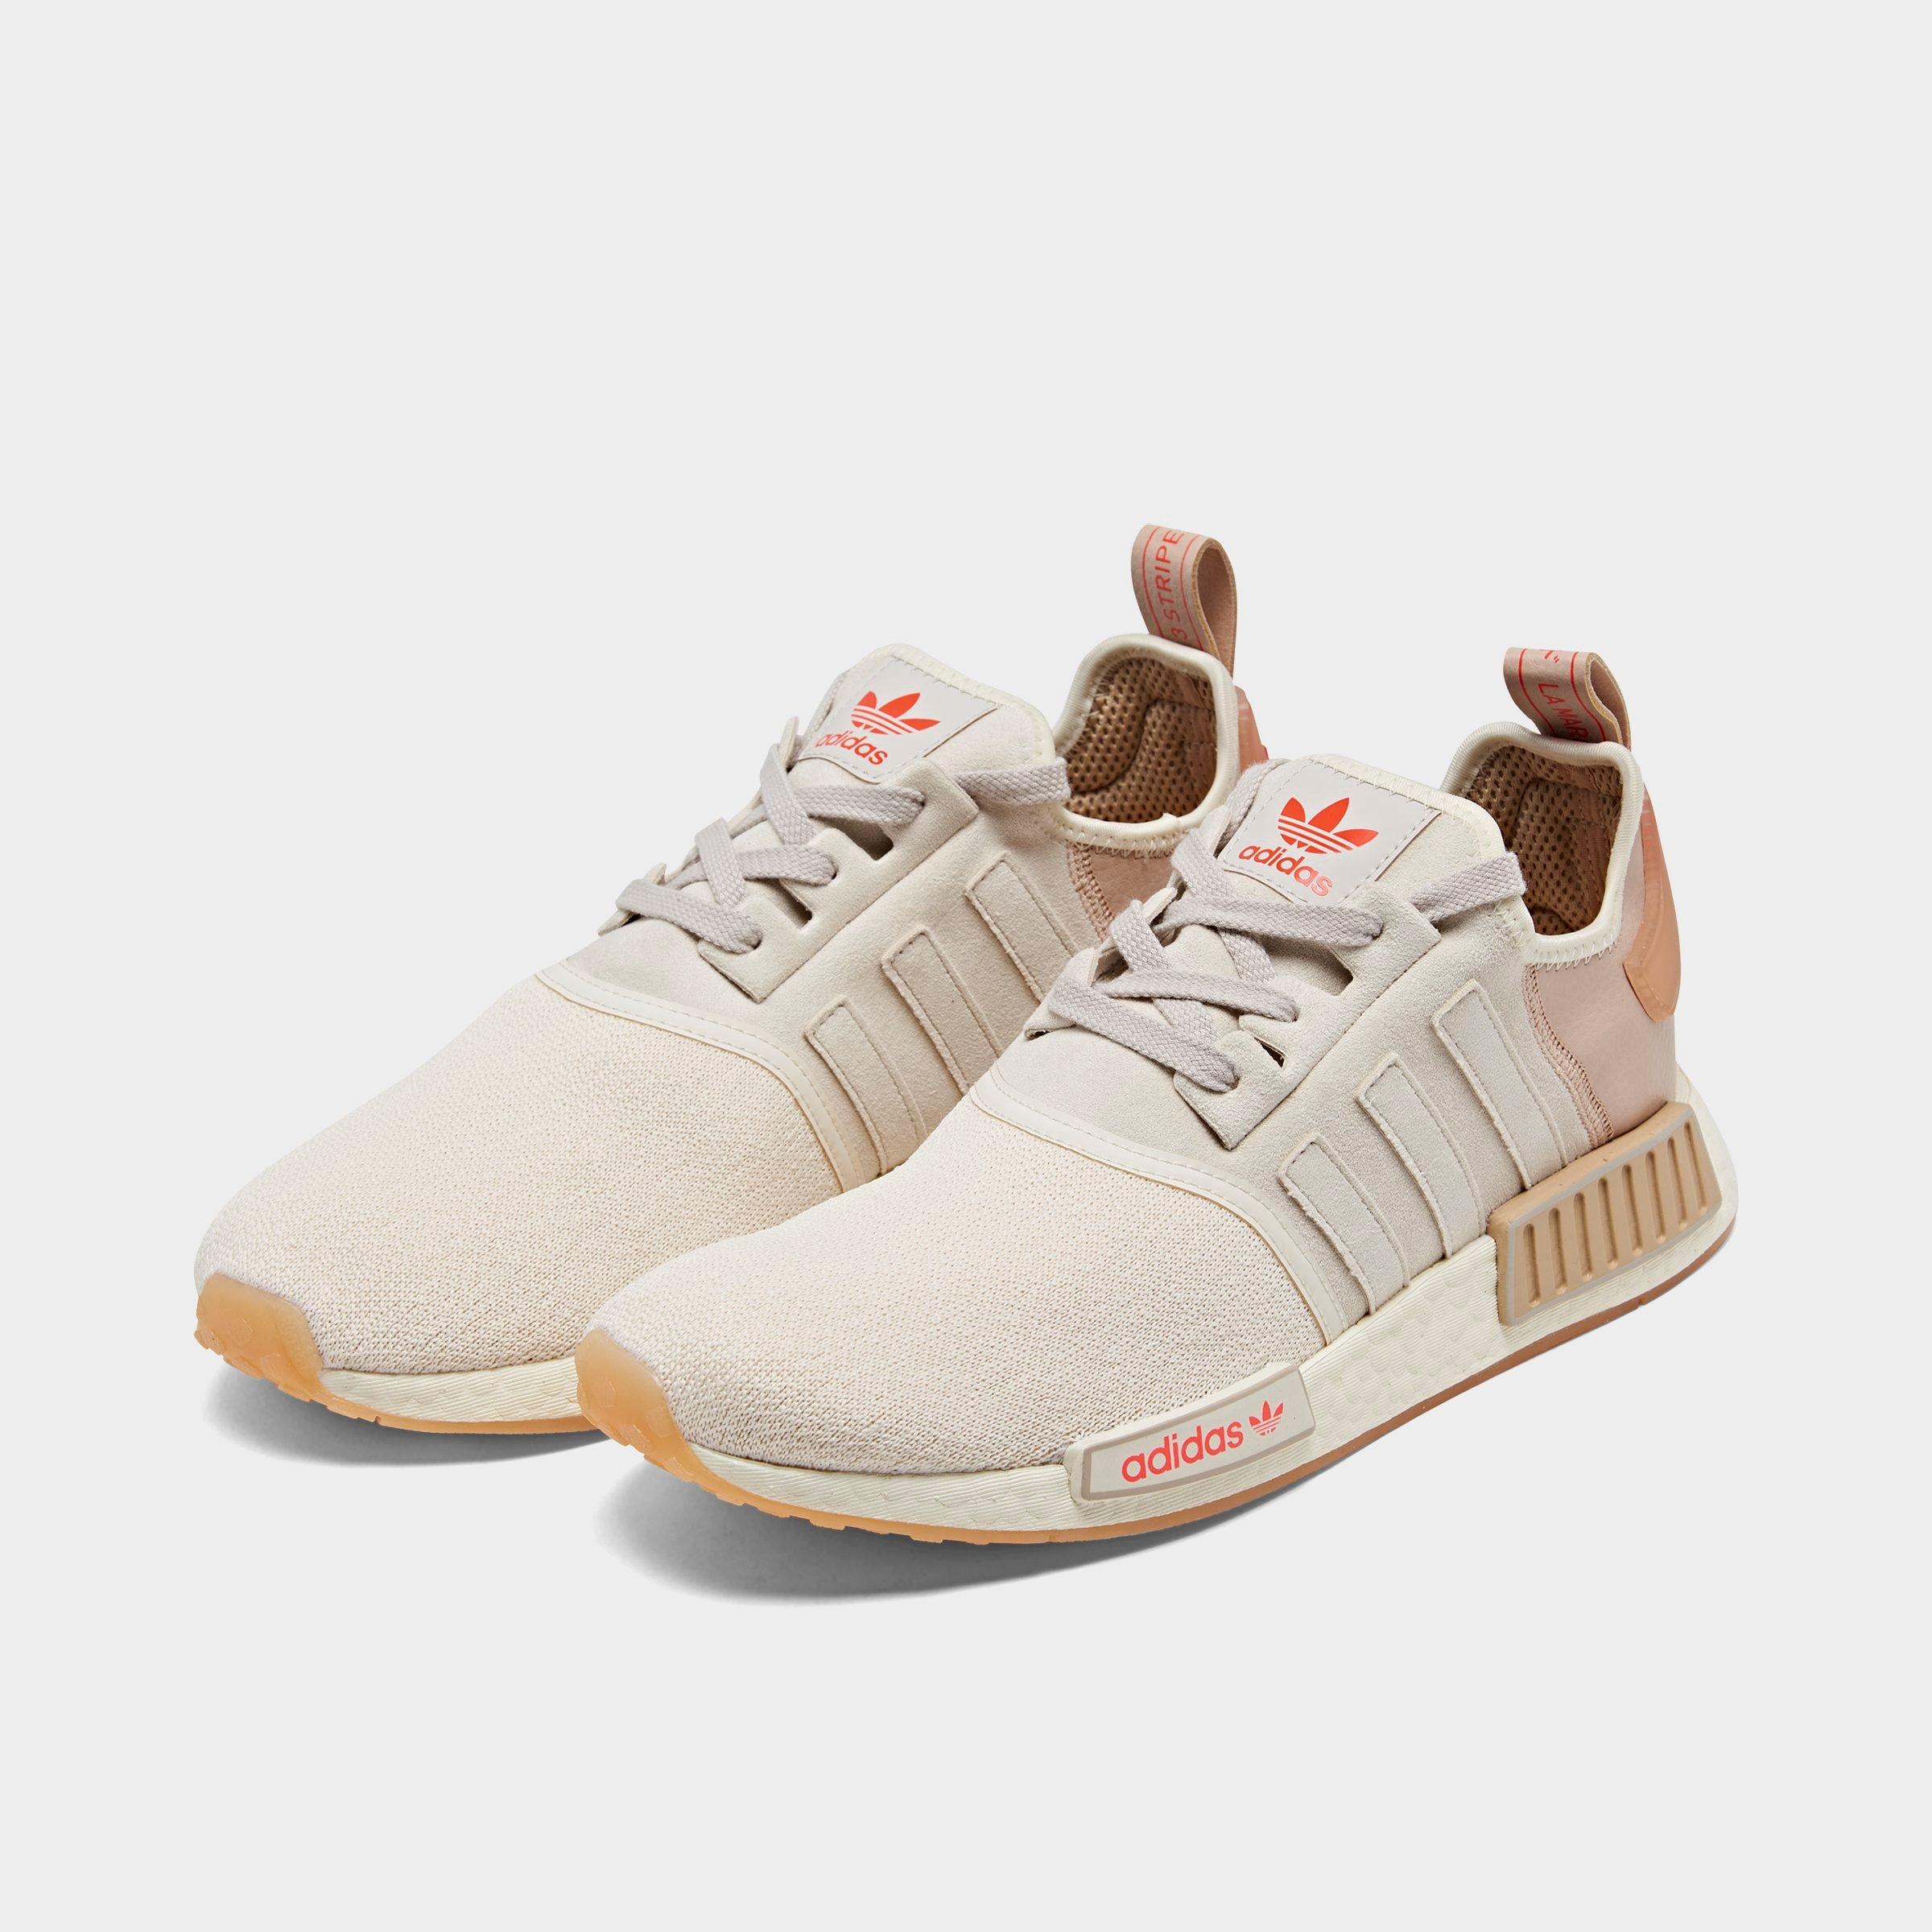 men's adidas nmd runner r1 casual shoes